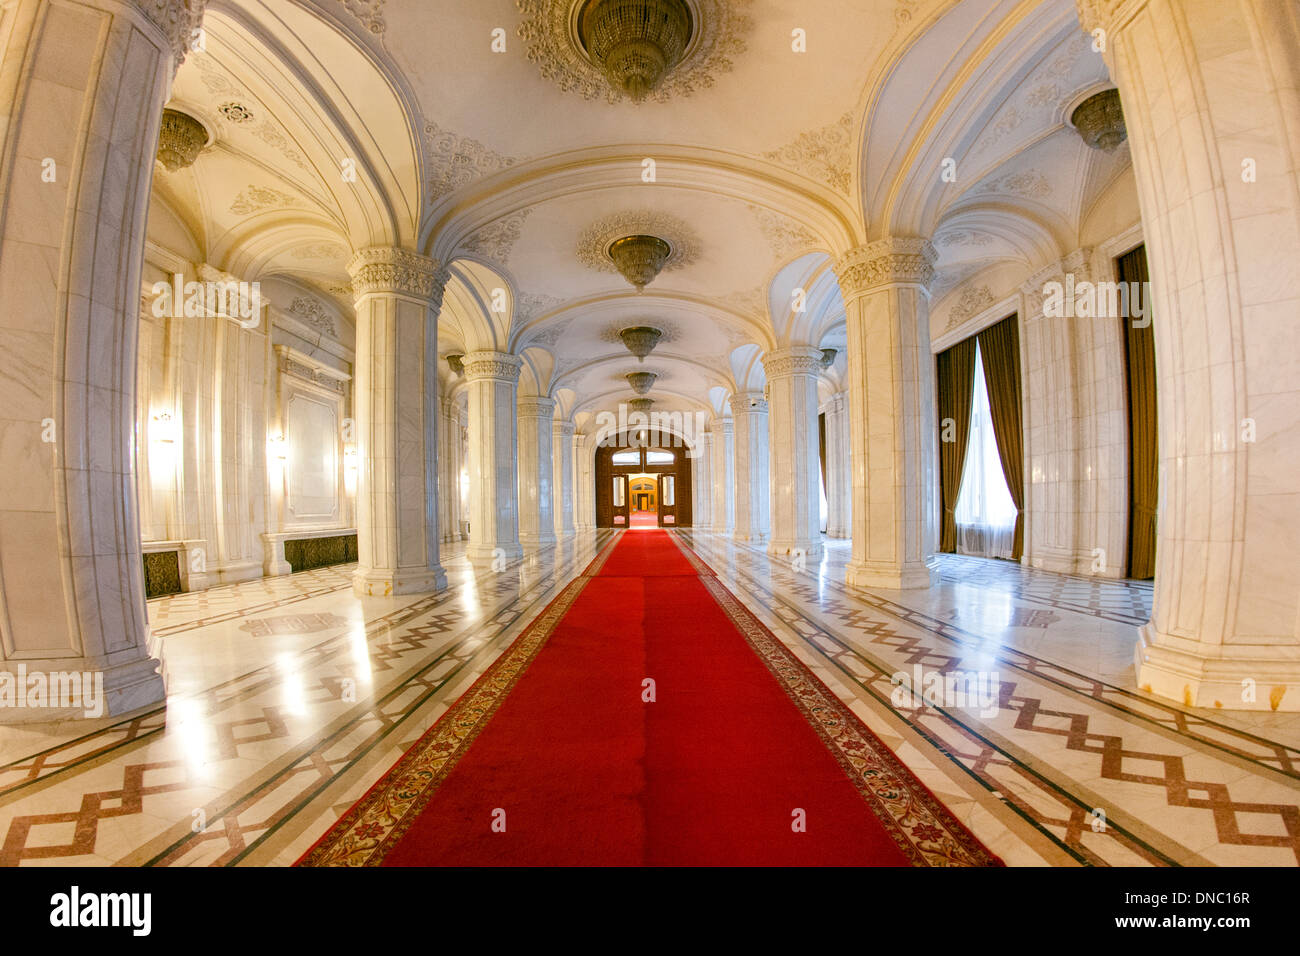 One of numerous halls in the Palace of the Parliament in Bucharest, the capital of Romania. Stock Photo